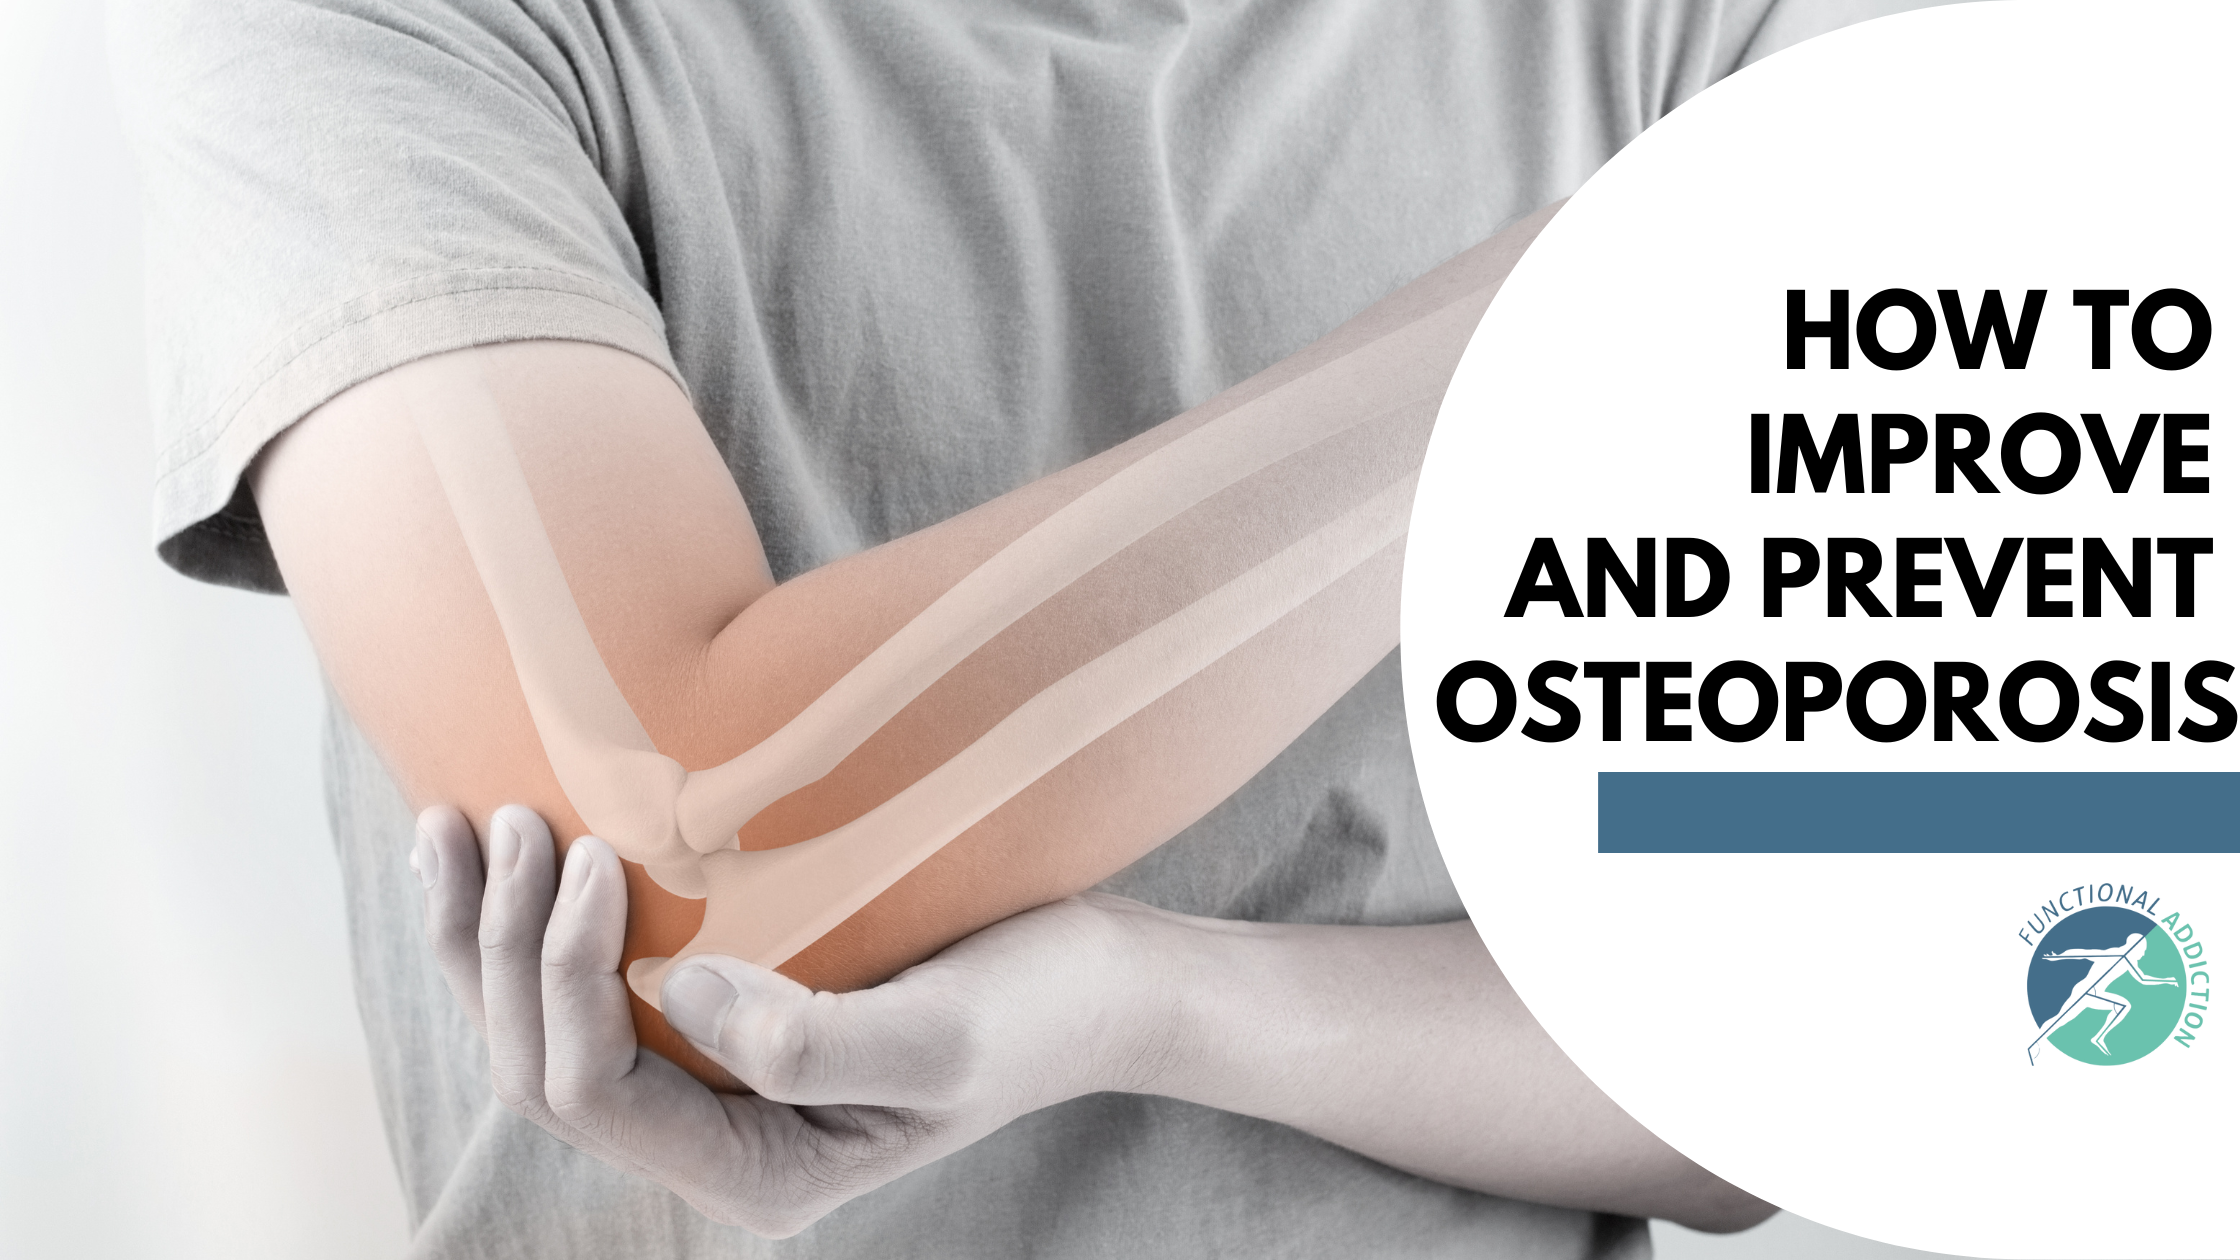 The Most Powerful Methods For Preventing Osteoporosis with Lifestyle